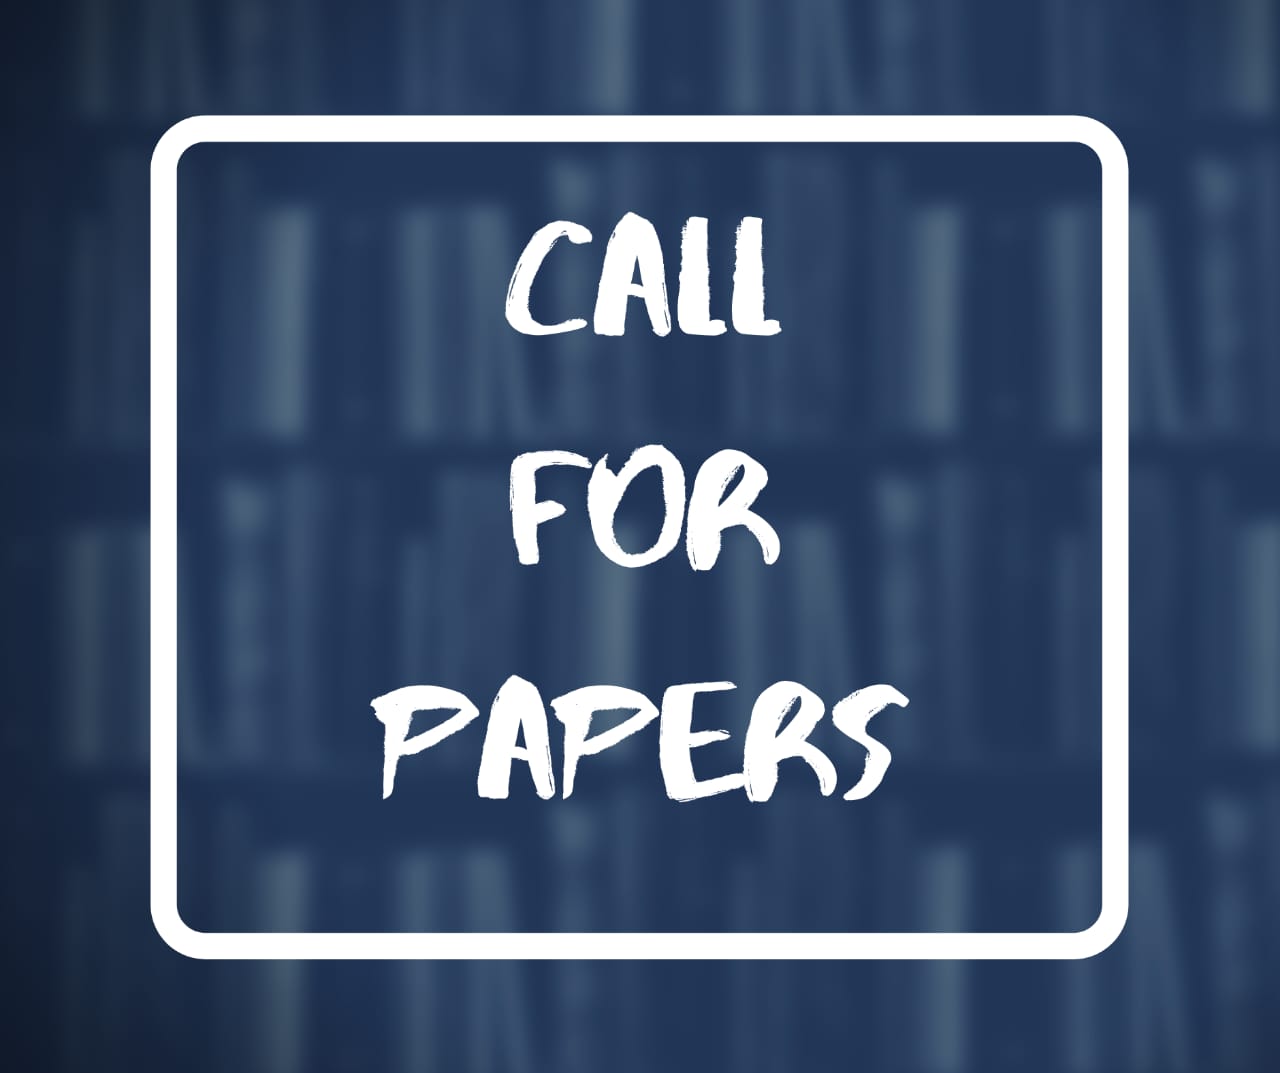 CfP: Journal of Law and Social Science, HNLU [Volume IX]: Submit by October 10